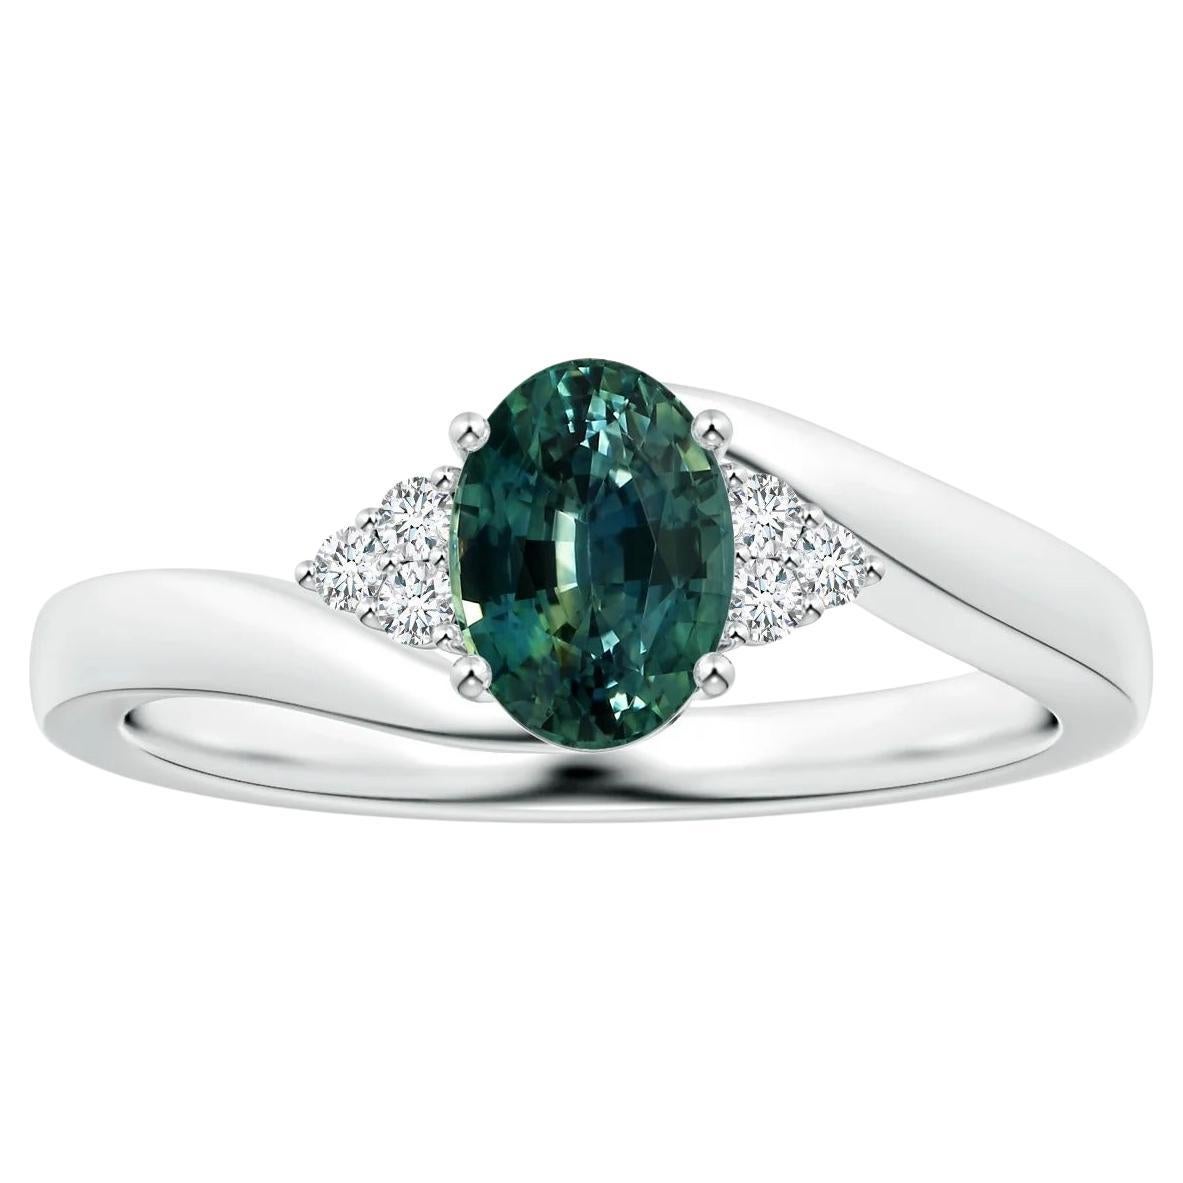 ANGARA GIA Certified Teal Sapphire Bypass Ring in White Gold with Diamonds